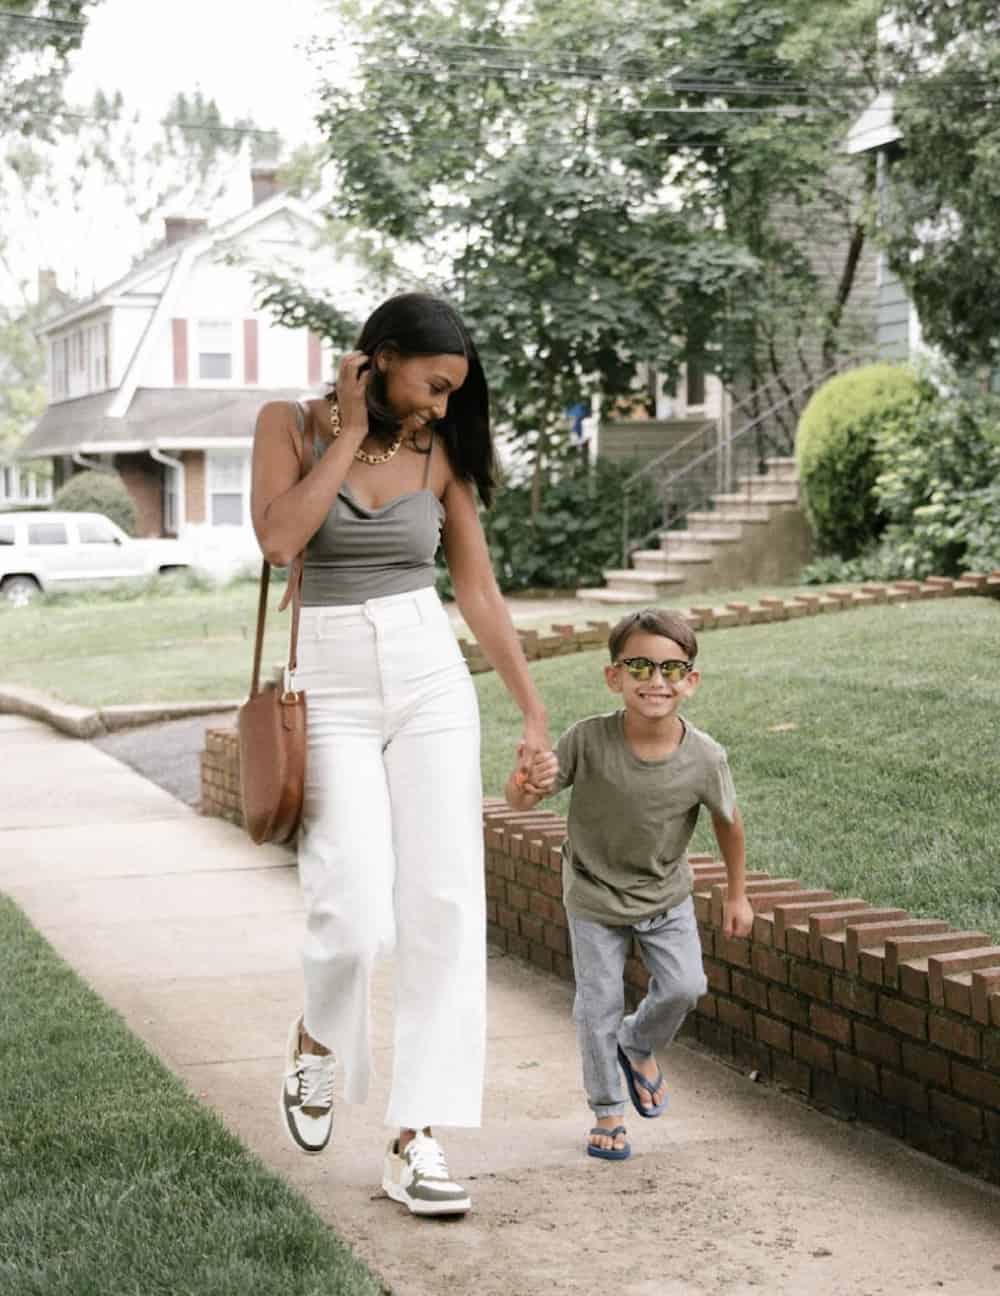 image of a woman and her son walking together, she is wearing white wide leg jeans, sneakers, and a green tank top